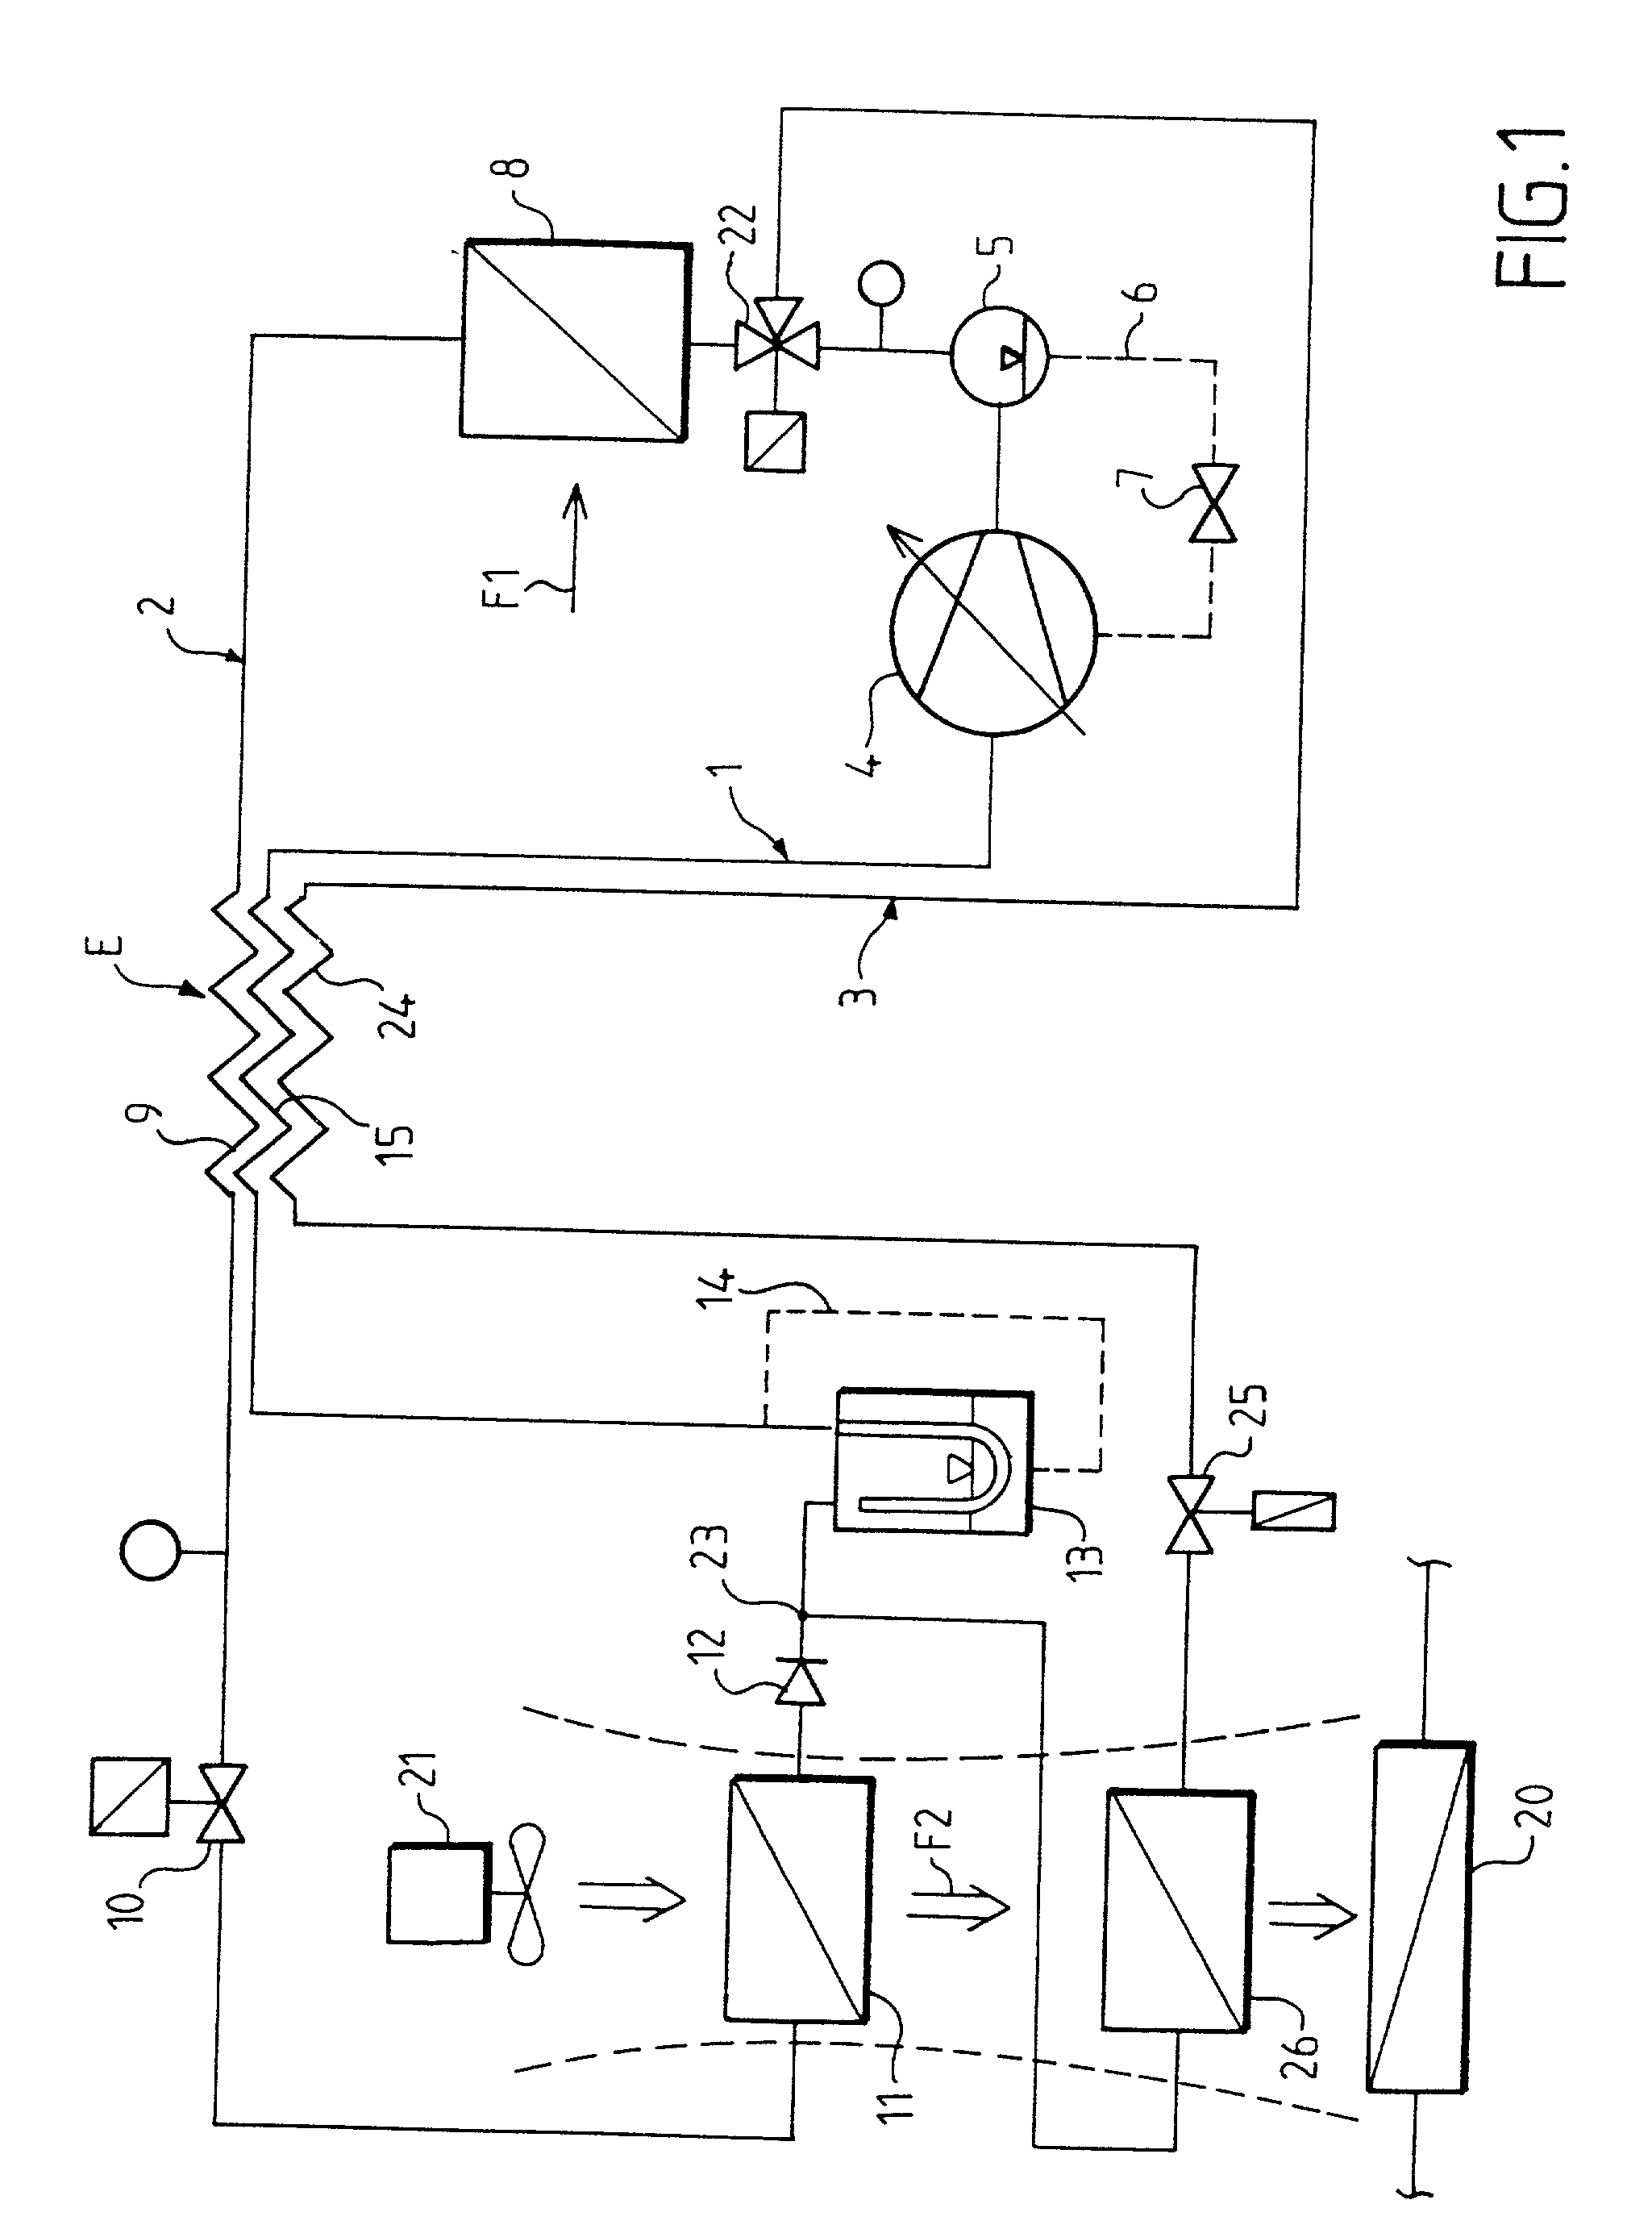 Vehicle air conditioning circuit using a refrigerant fluid in the supercritical state